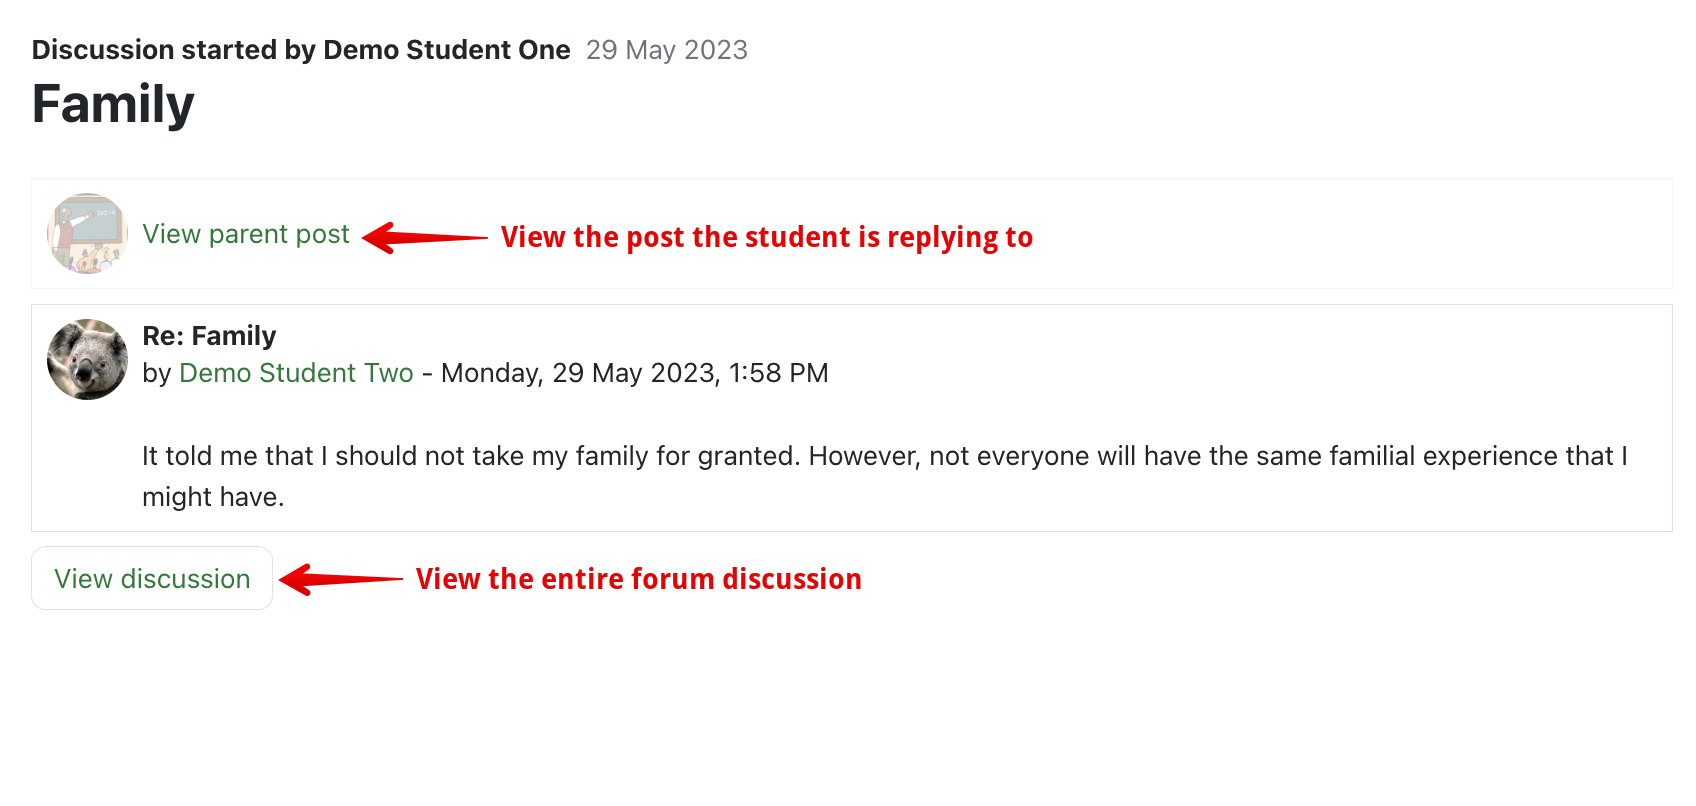 The forum post reader of the "Grade users" section of a forum, with arrows pointing to View parent post and View discussion.